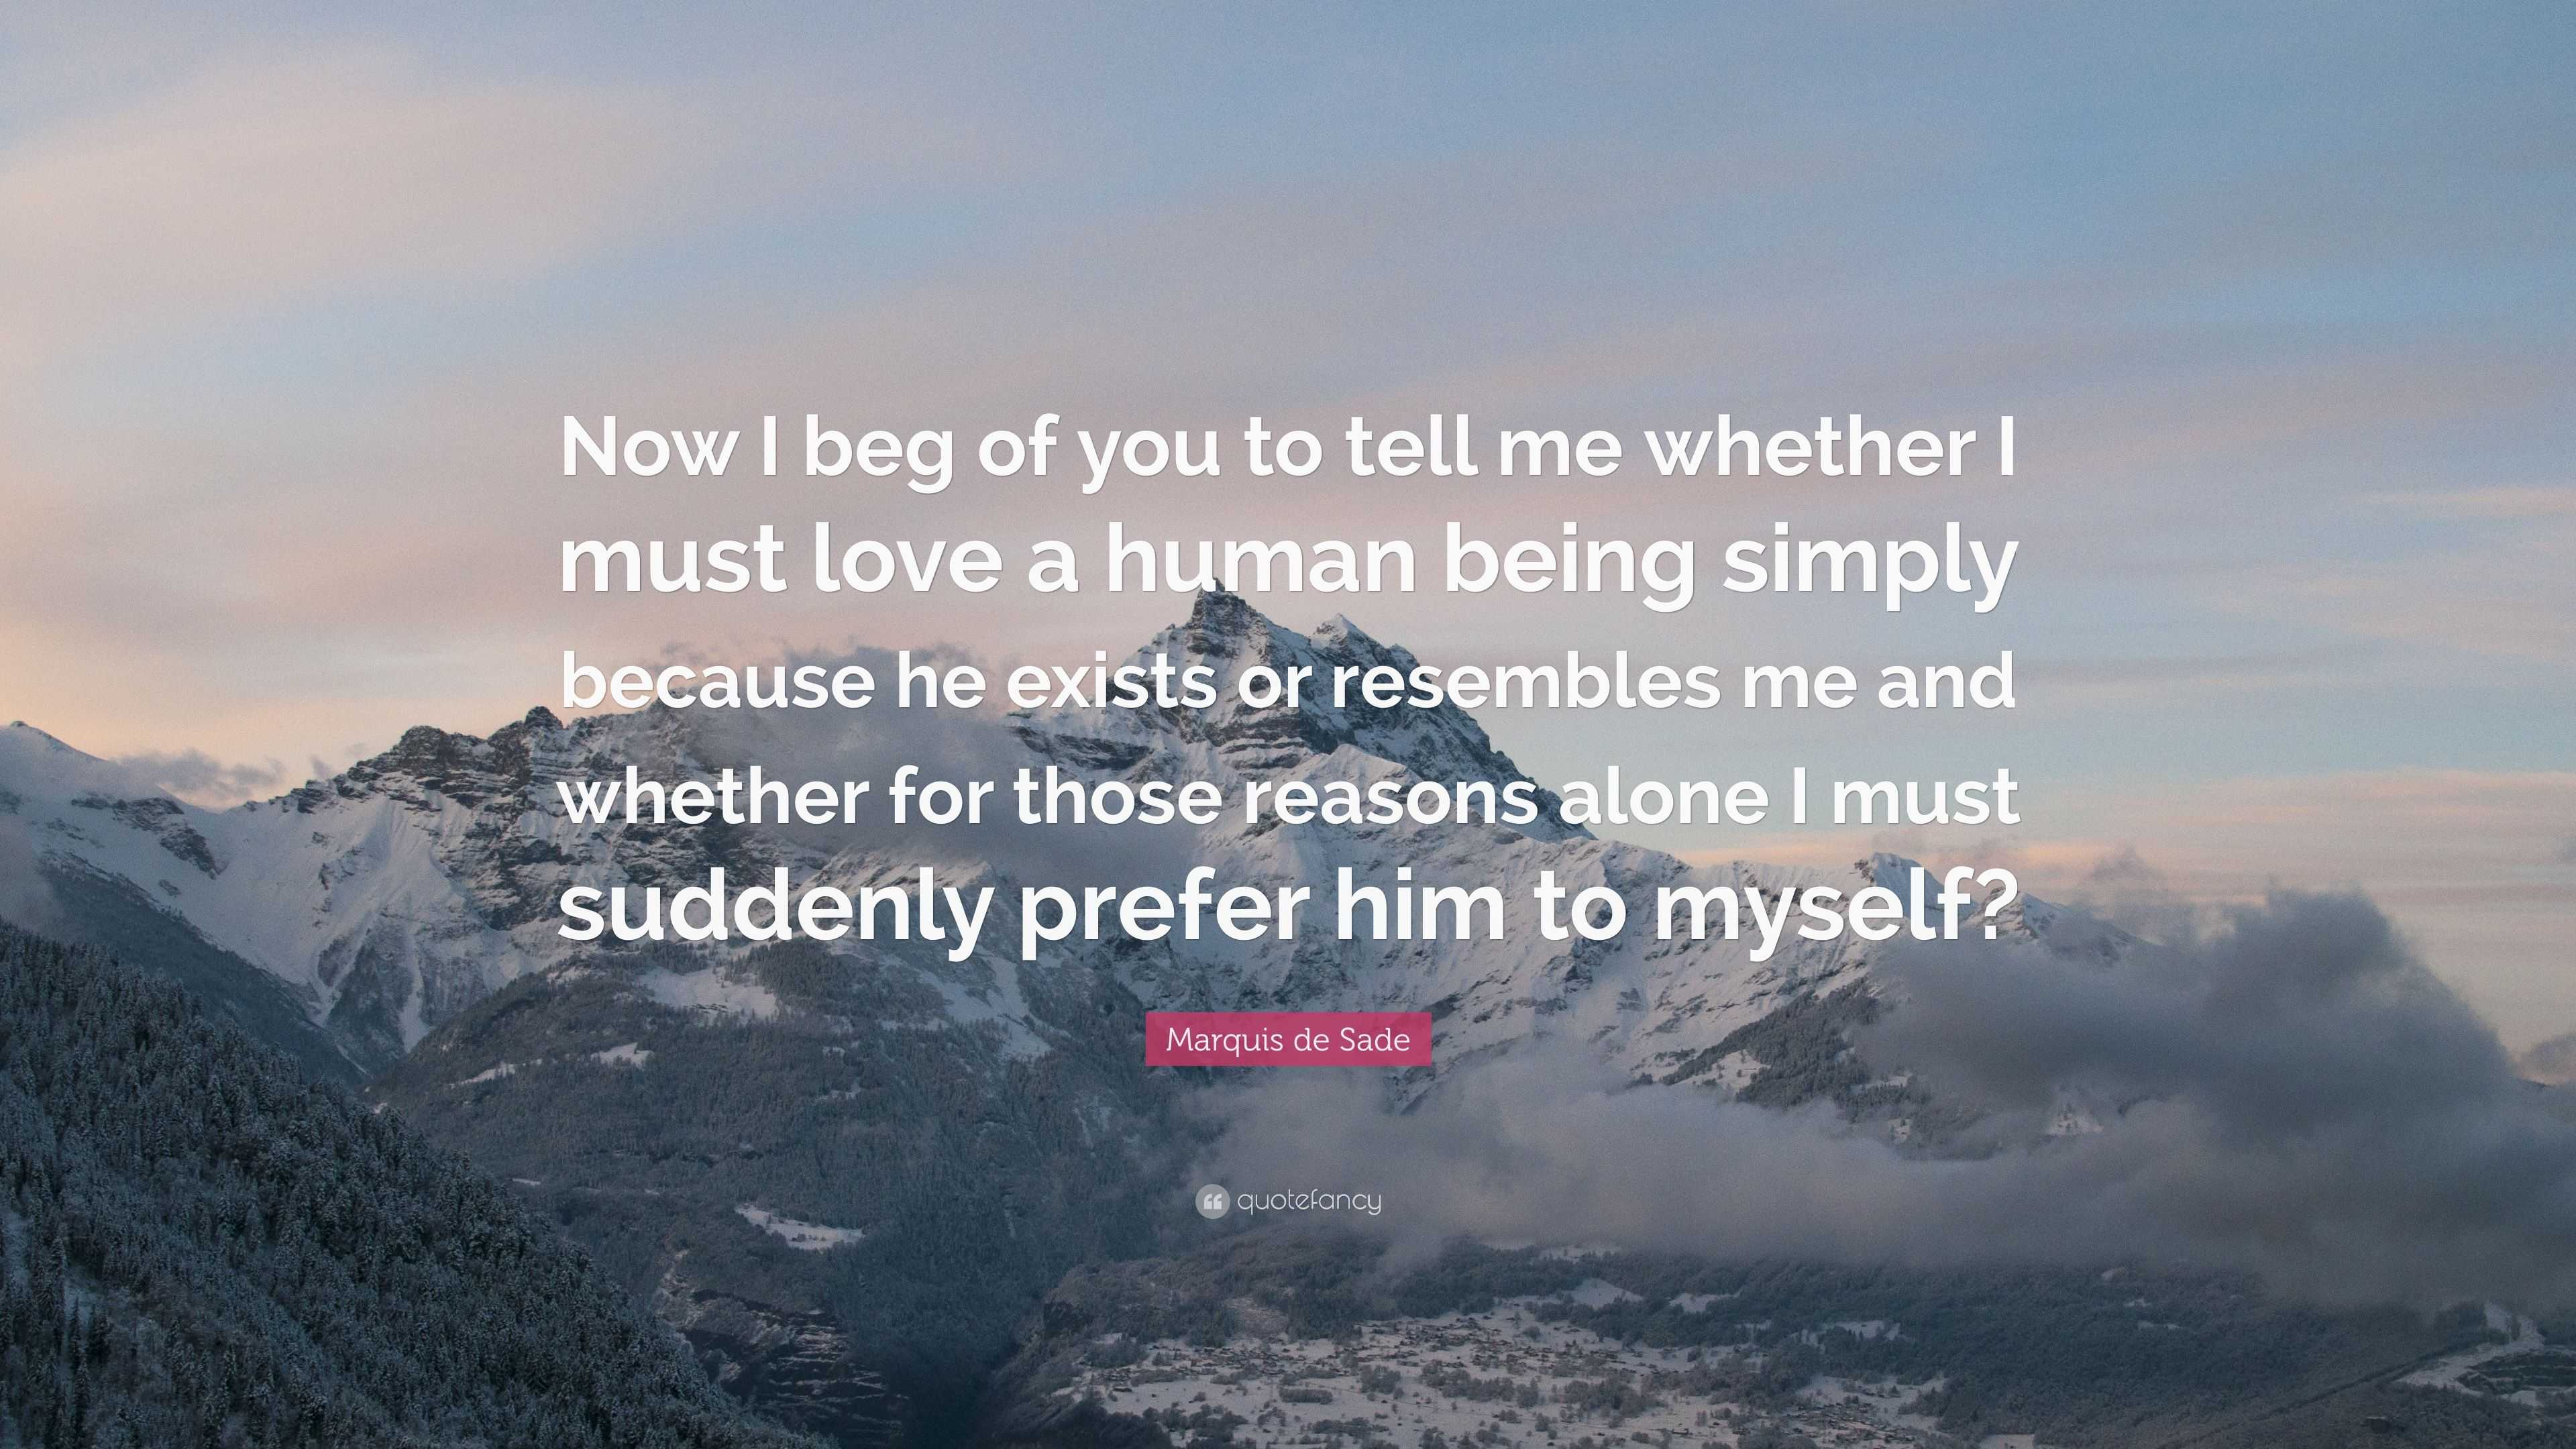 Marquis de Sade Quote: “Now I beg of you to tell me whether I must love ...